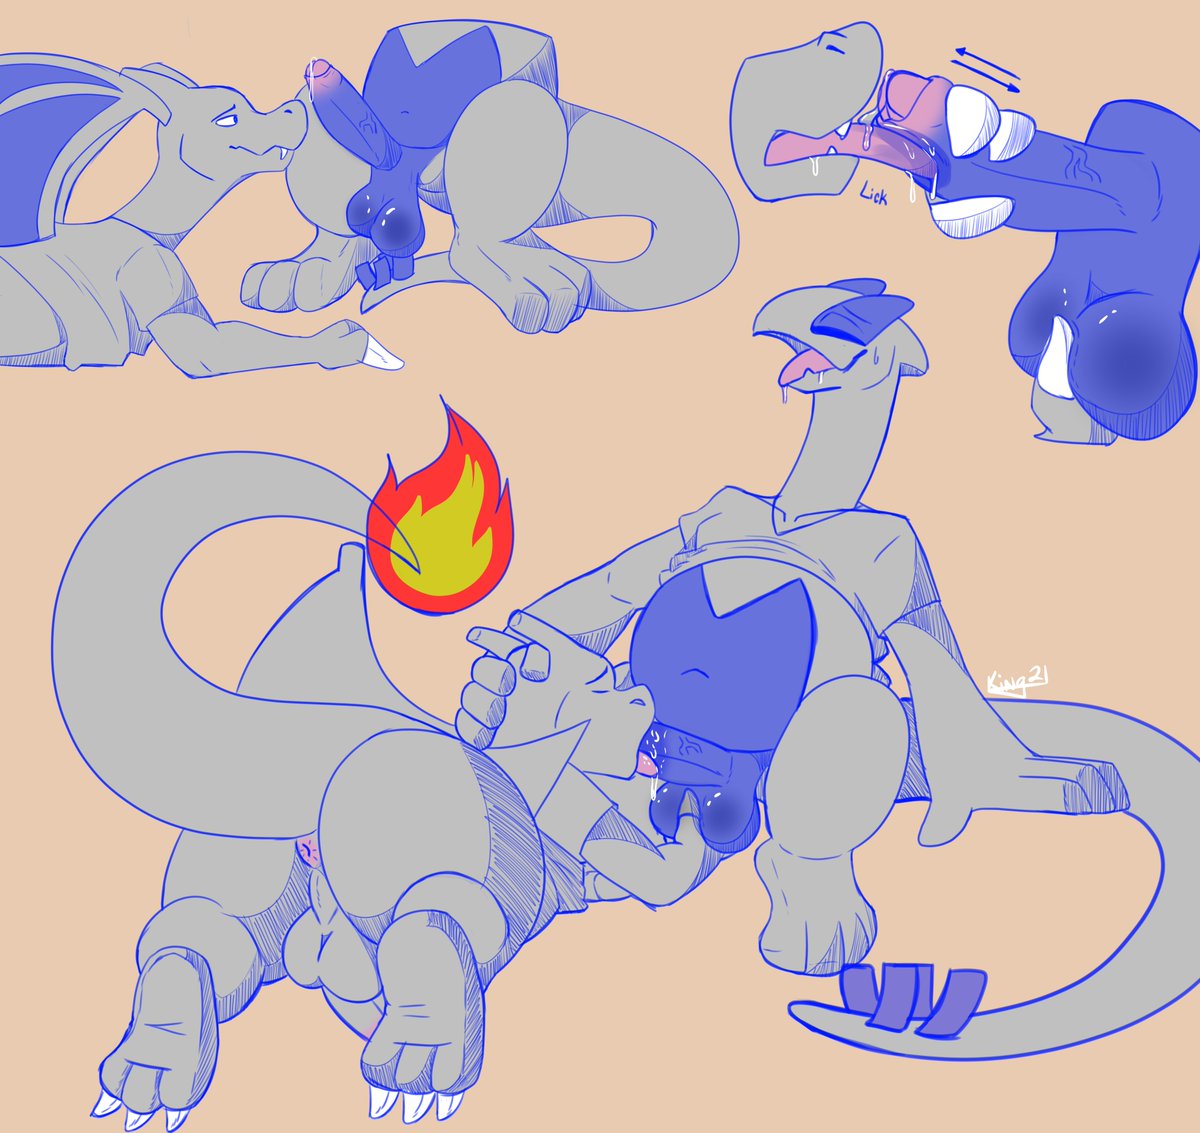 81. NSFW I don't think Charizard minds the fact that he has to enterta...